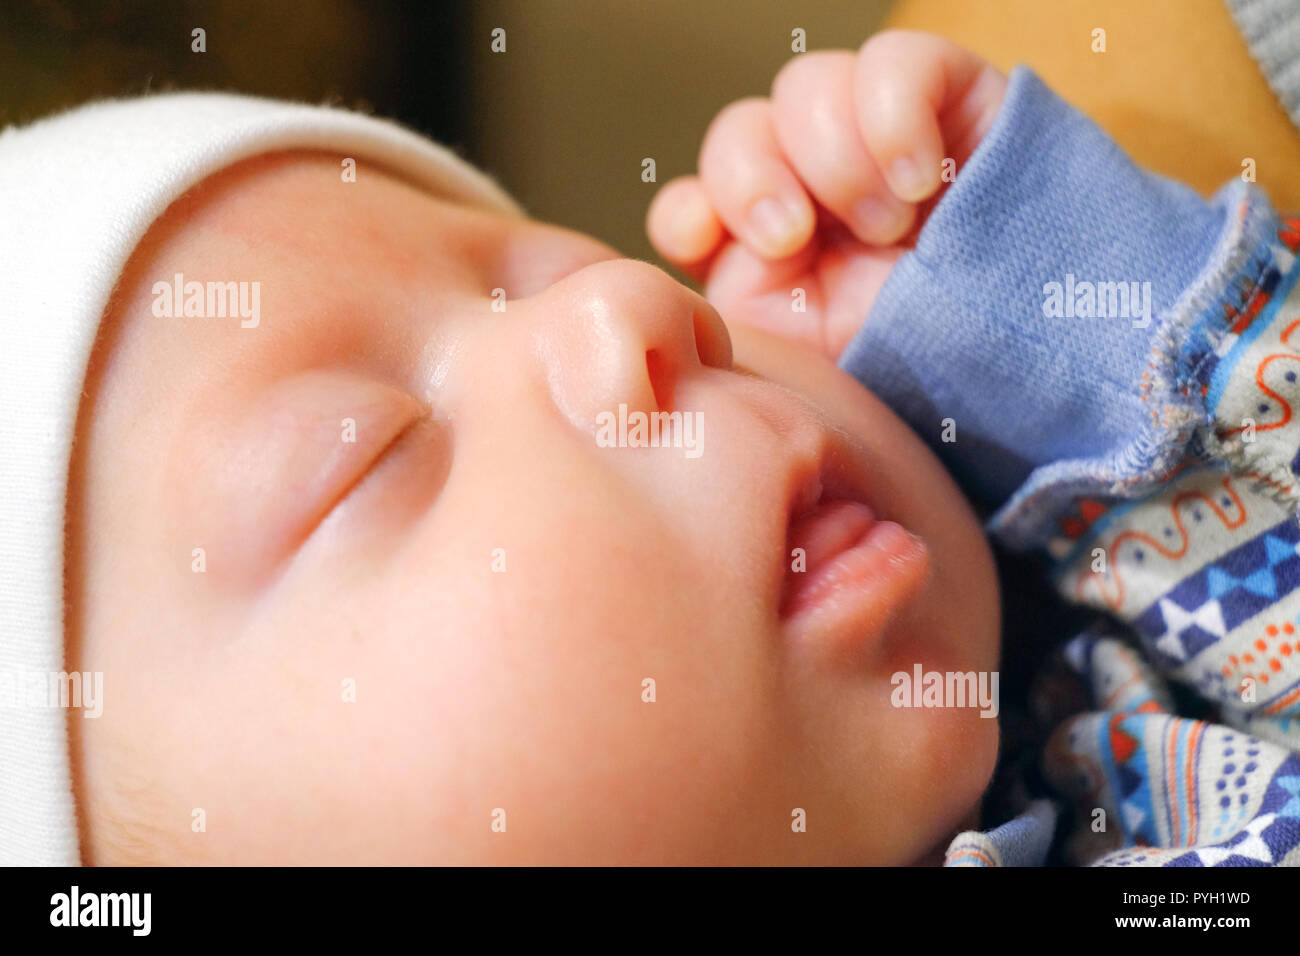 The baby sleeps sweetly with his mouth open. The child raised his hand to his face. Quietly dozing Stock Photo